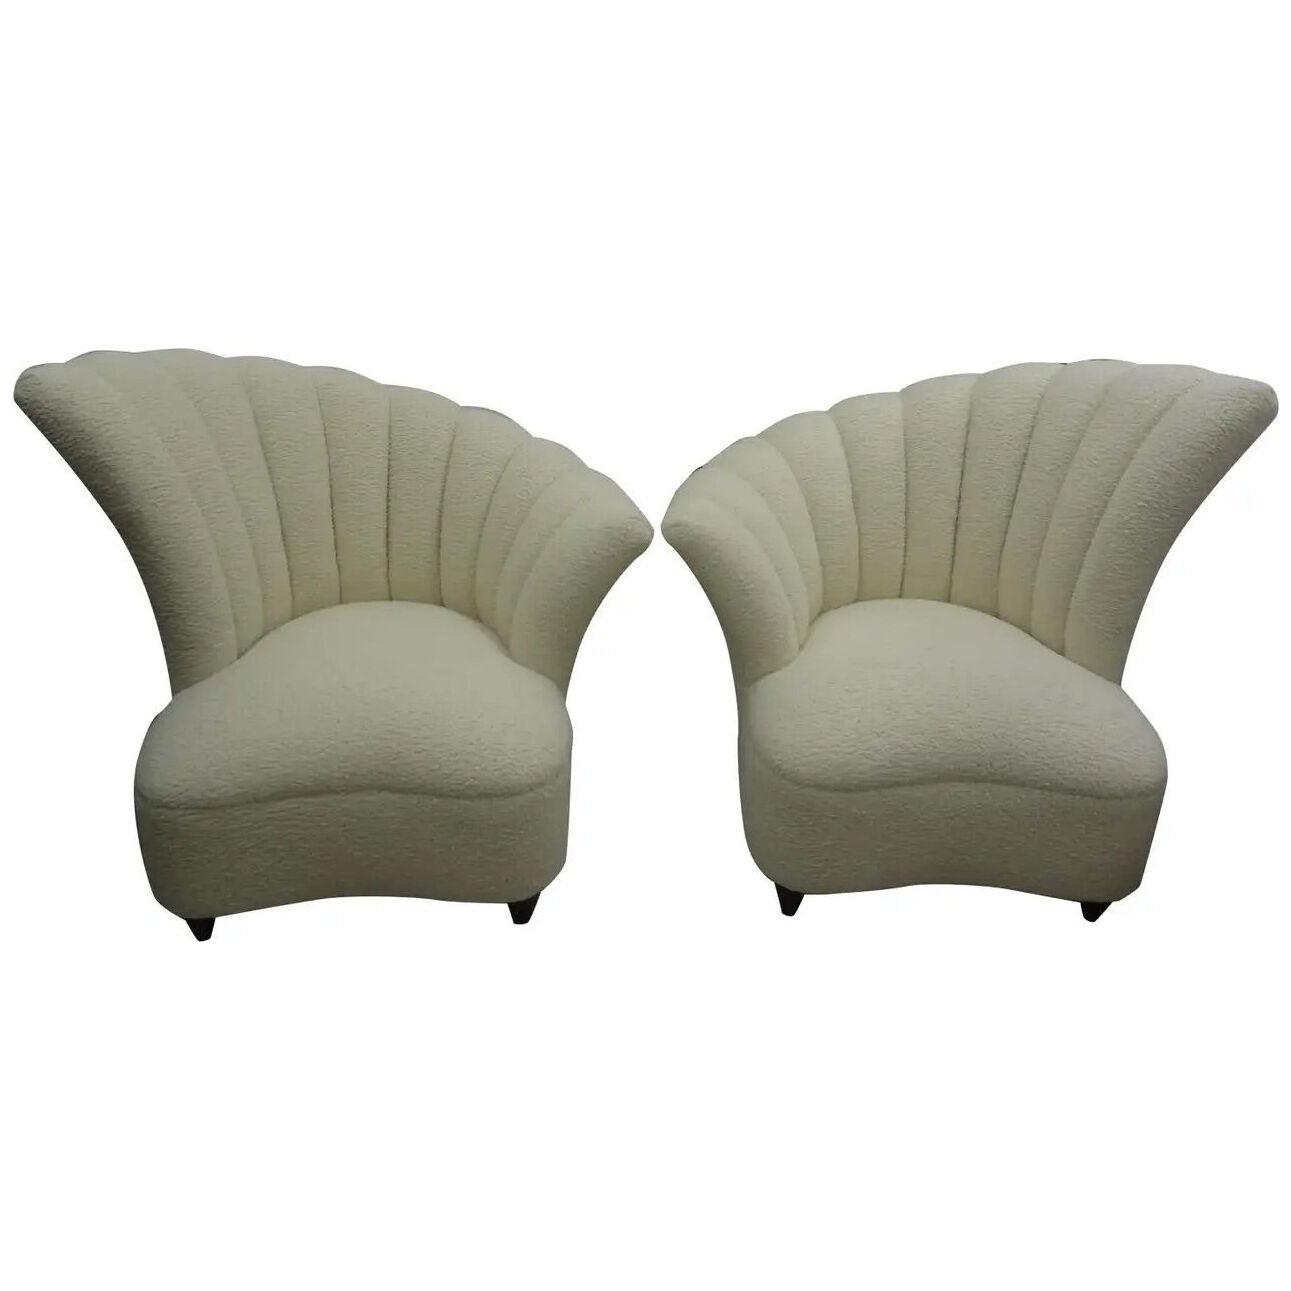 Pair of Grosfeld House Asymmetrical Channel Back Lounge Chairs